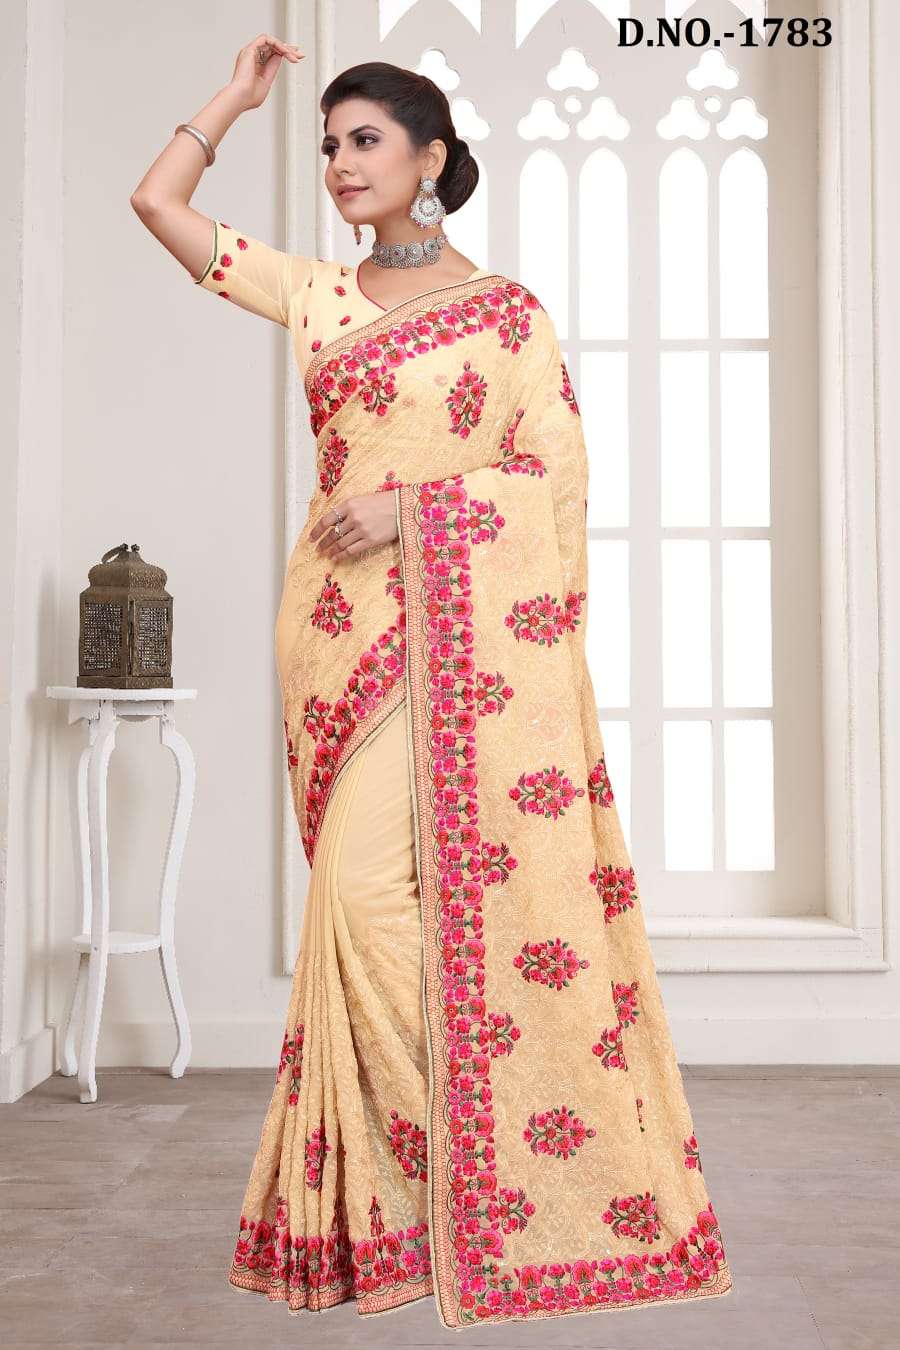 Buy Latest Saree For Girls Online Get Up To 50% OFF